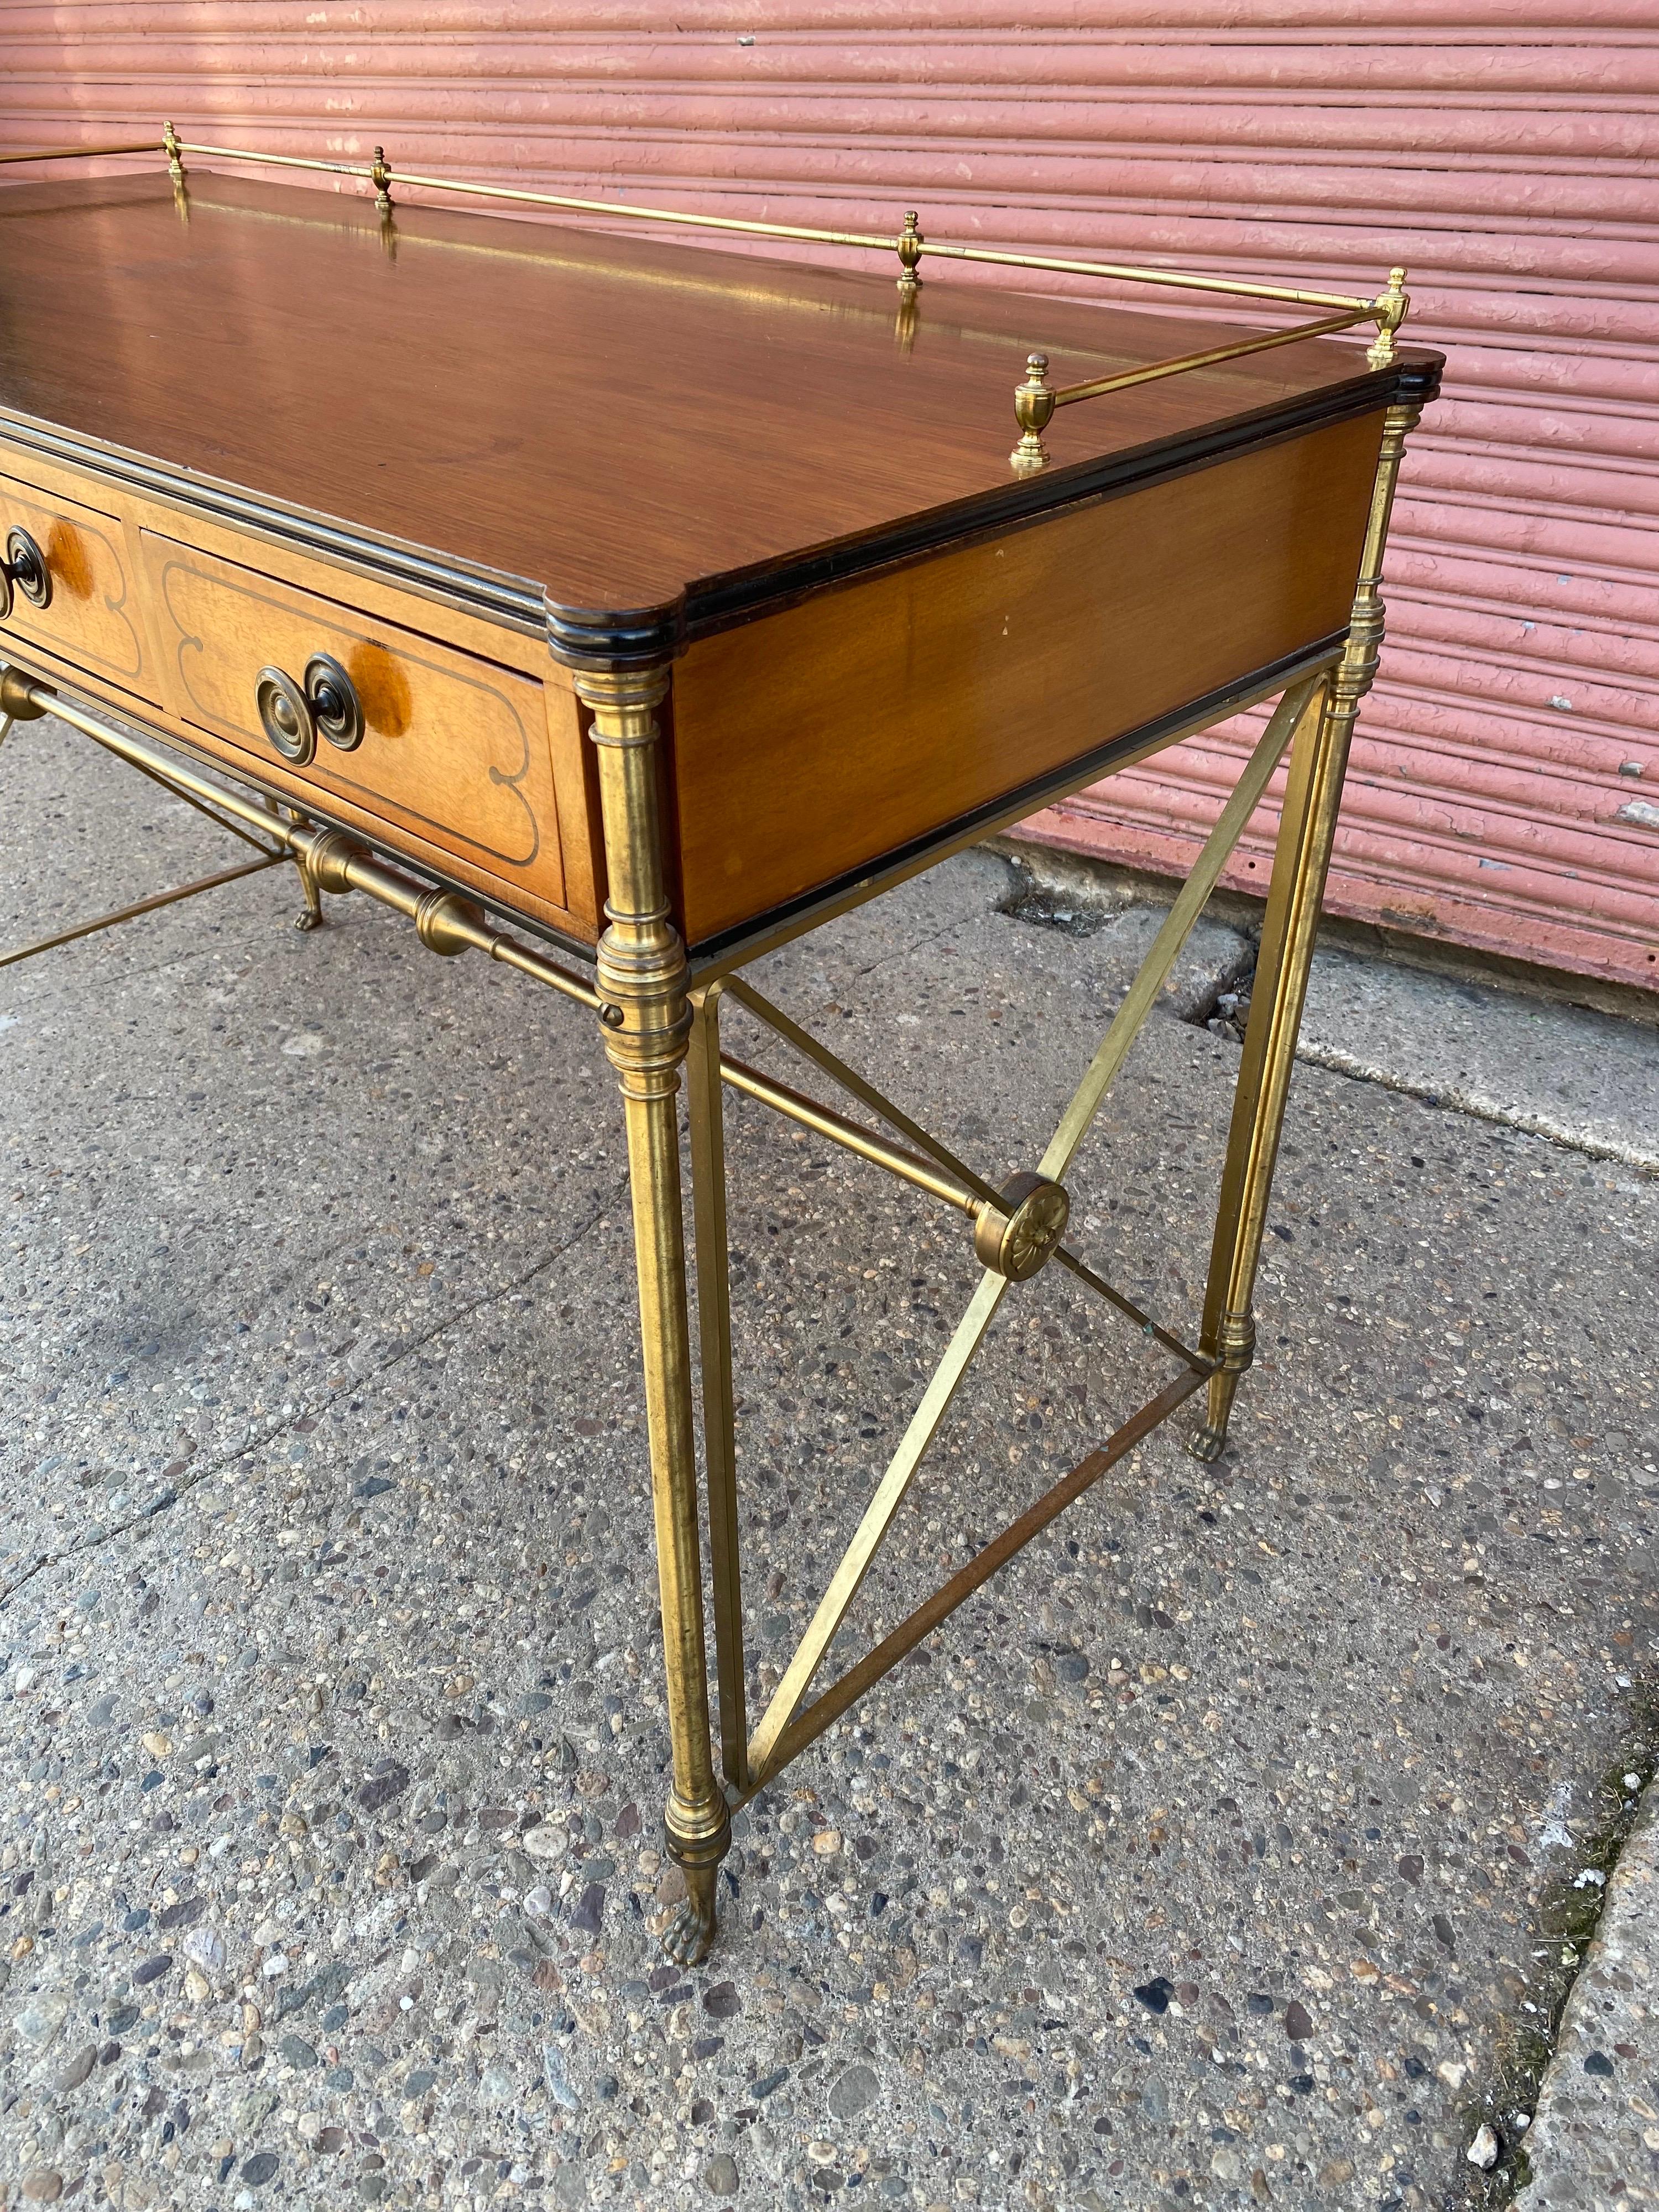 Kittinger English Regency Style Rosewood Writing Desk. Campaign Style with Bronze Legs and upper apron arond sides and back of writing surface. Perfect to use as a Console Table as well! Kittinger Stamp inside drawer. Top surface shows some wear as